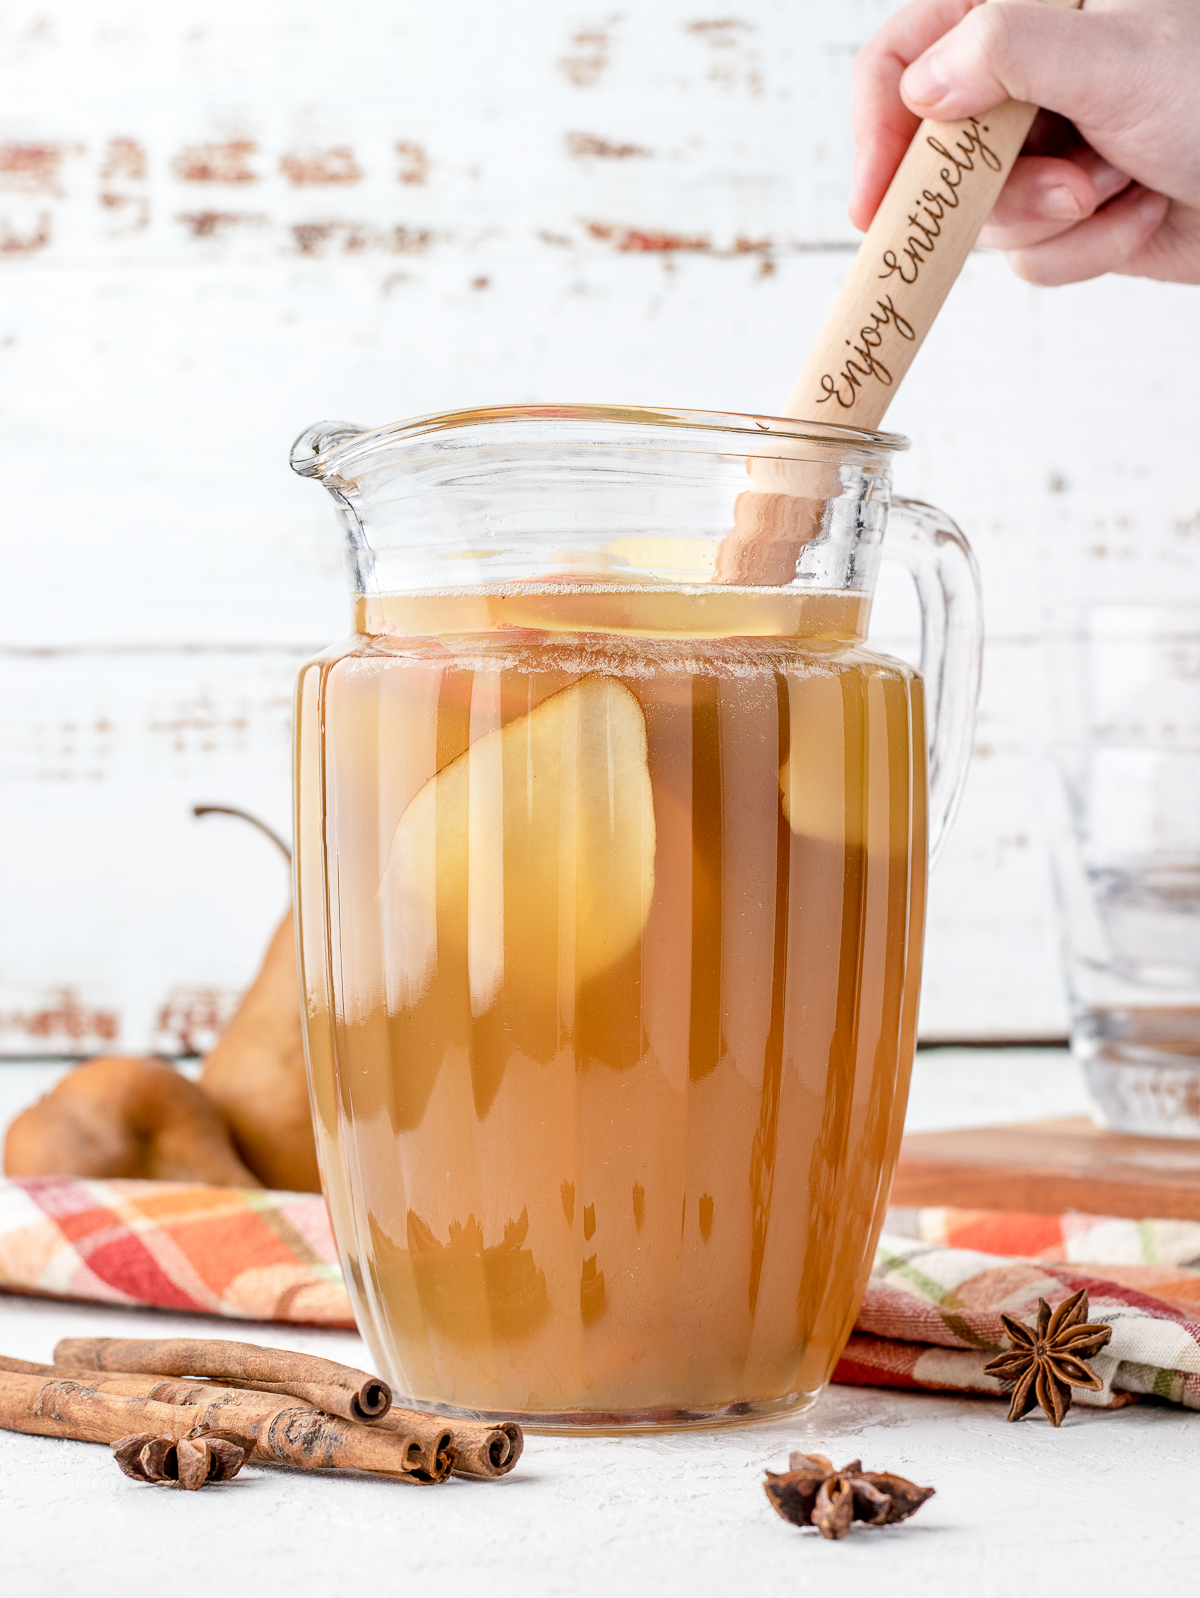 Hand stirring Apple Cider Sangria Mocktail with wooden spoon.